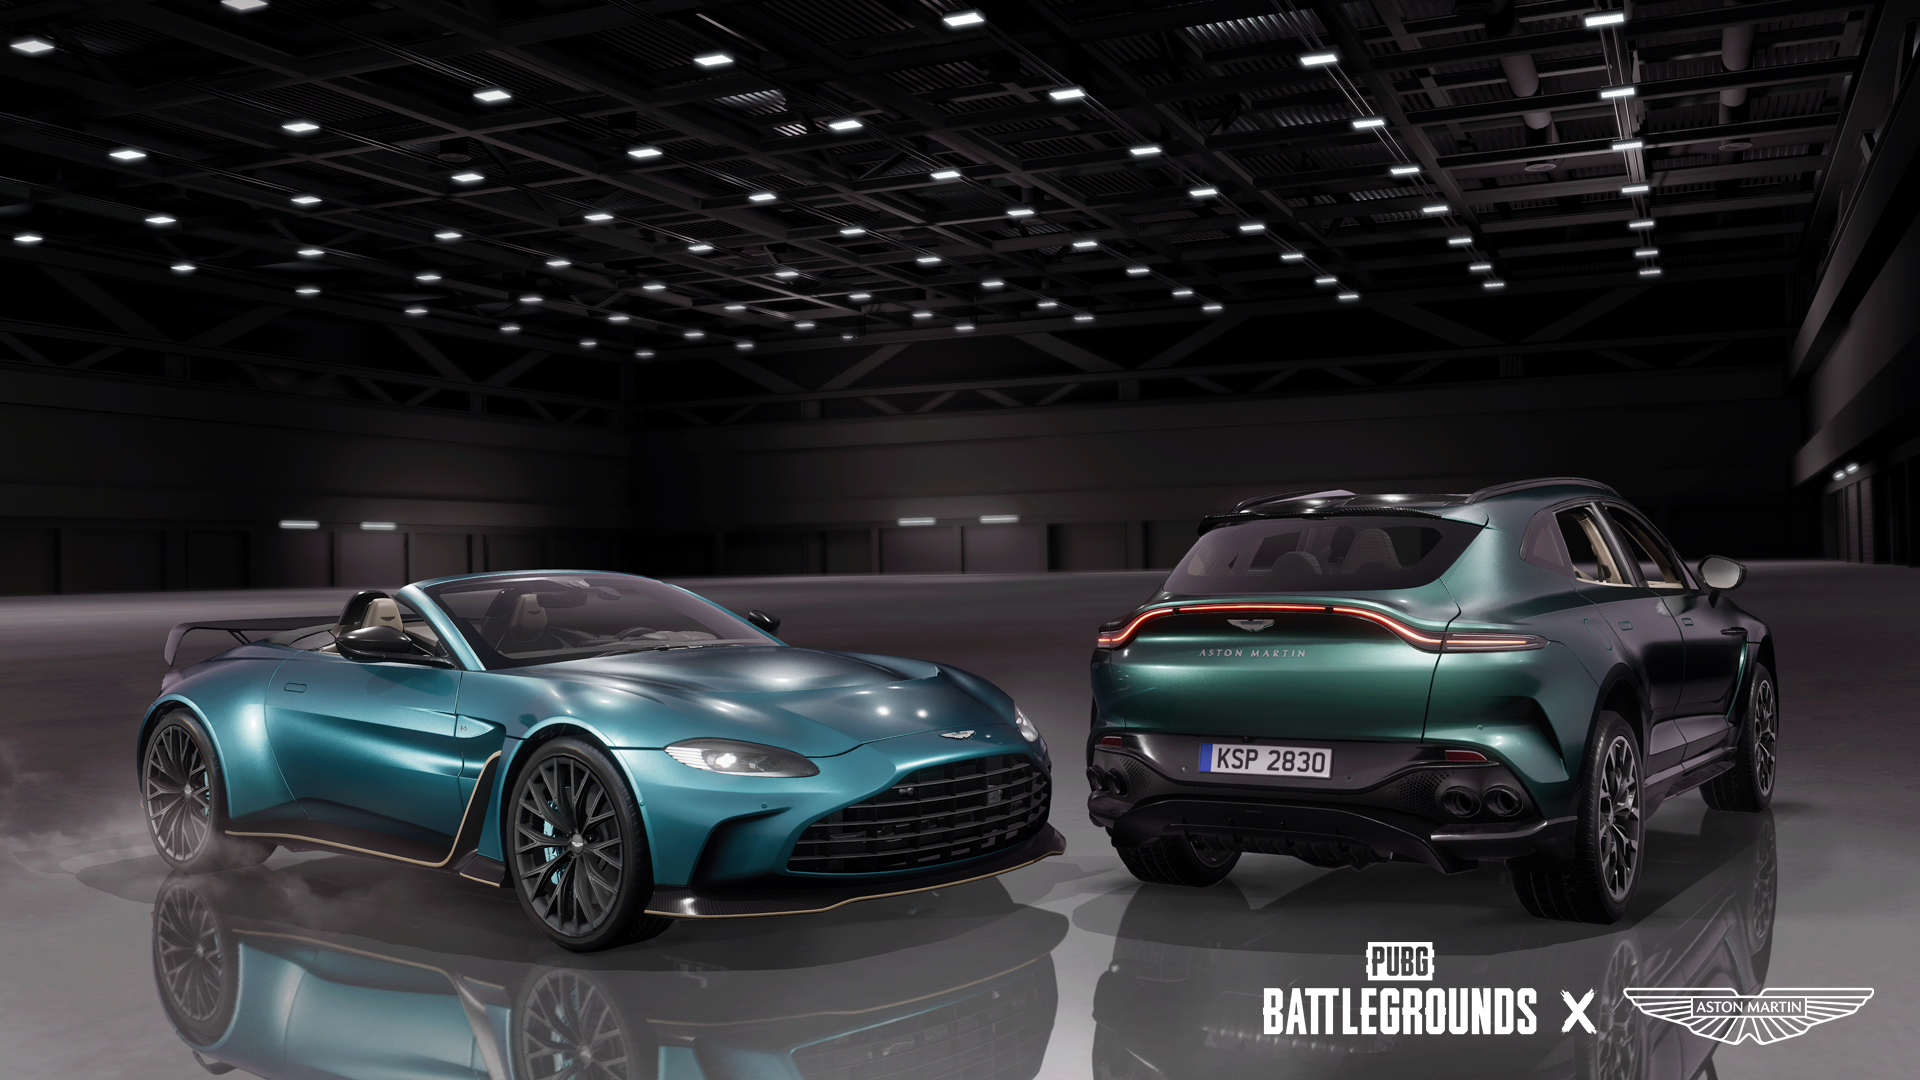 British automobile manufacturer Aston Martin collaborated with Pubg, leveraging the popularity of gaming to reach a wider consumer-base. Photo: Aston Martin